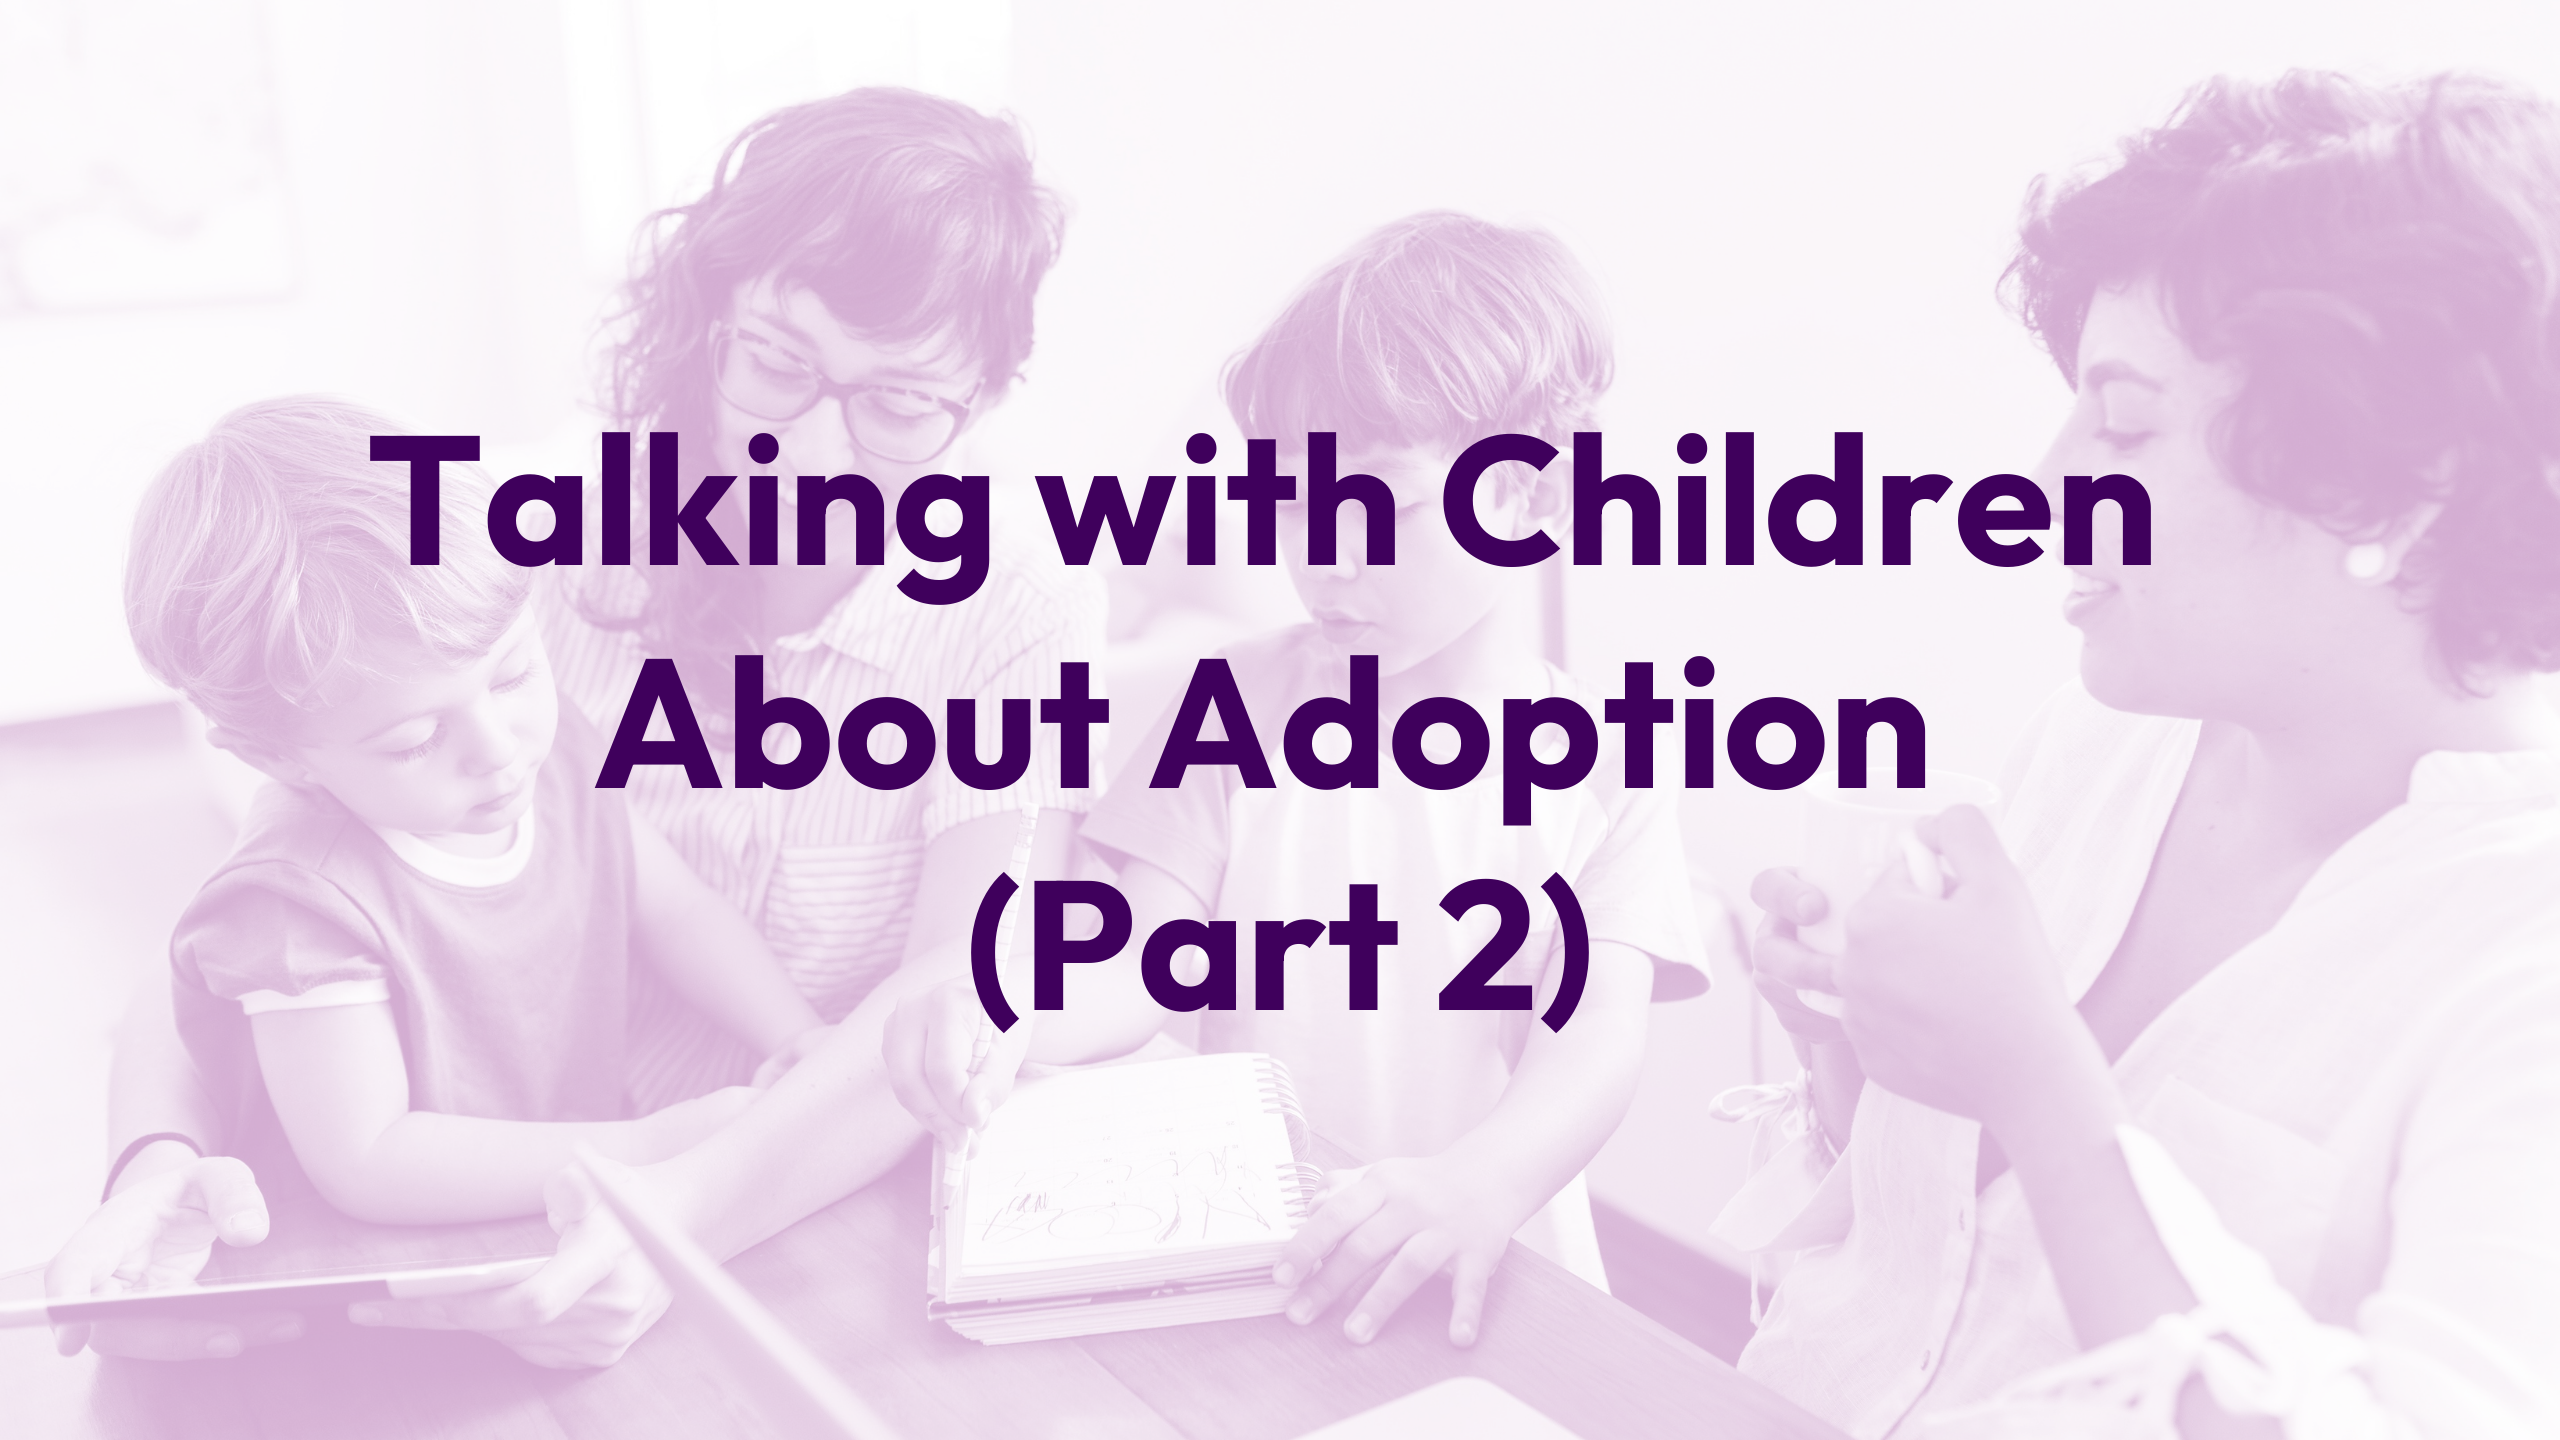 Talking with Your Children About Adoption (Part 2) Webinar